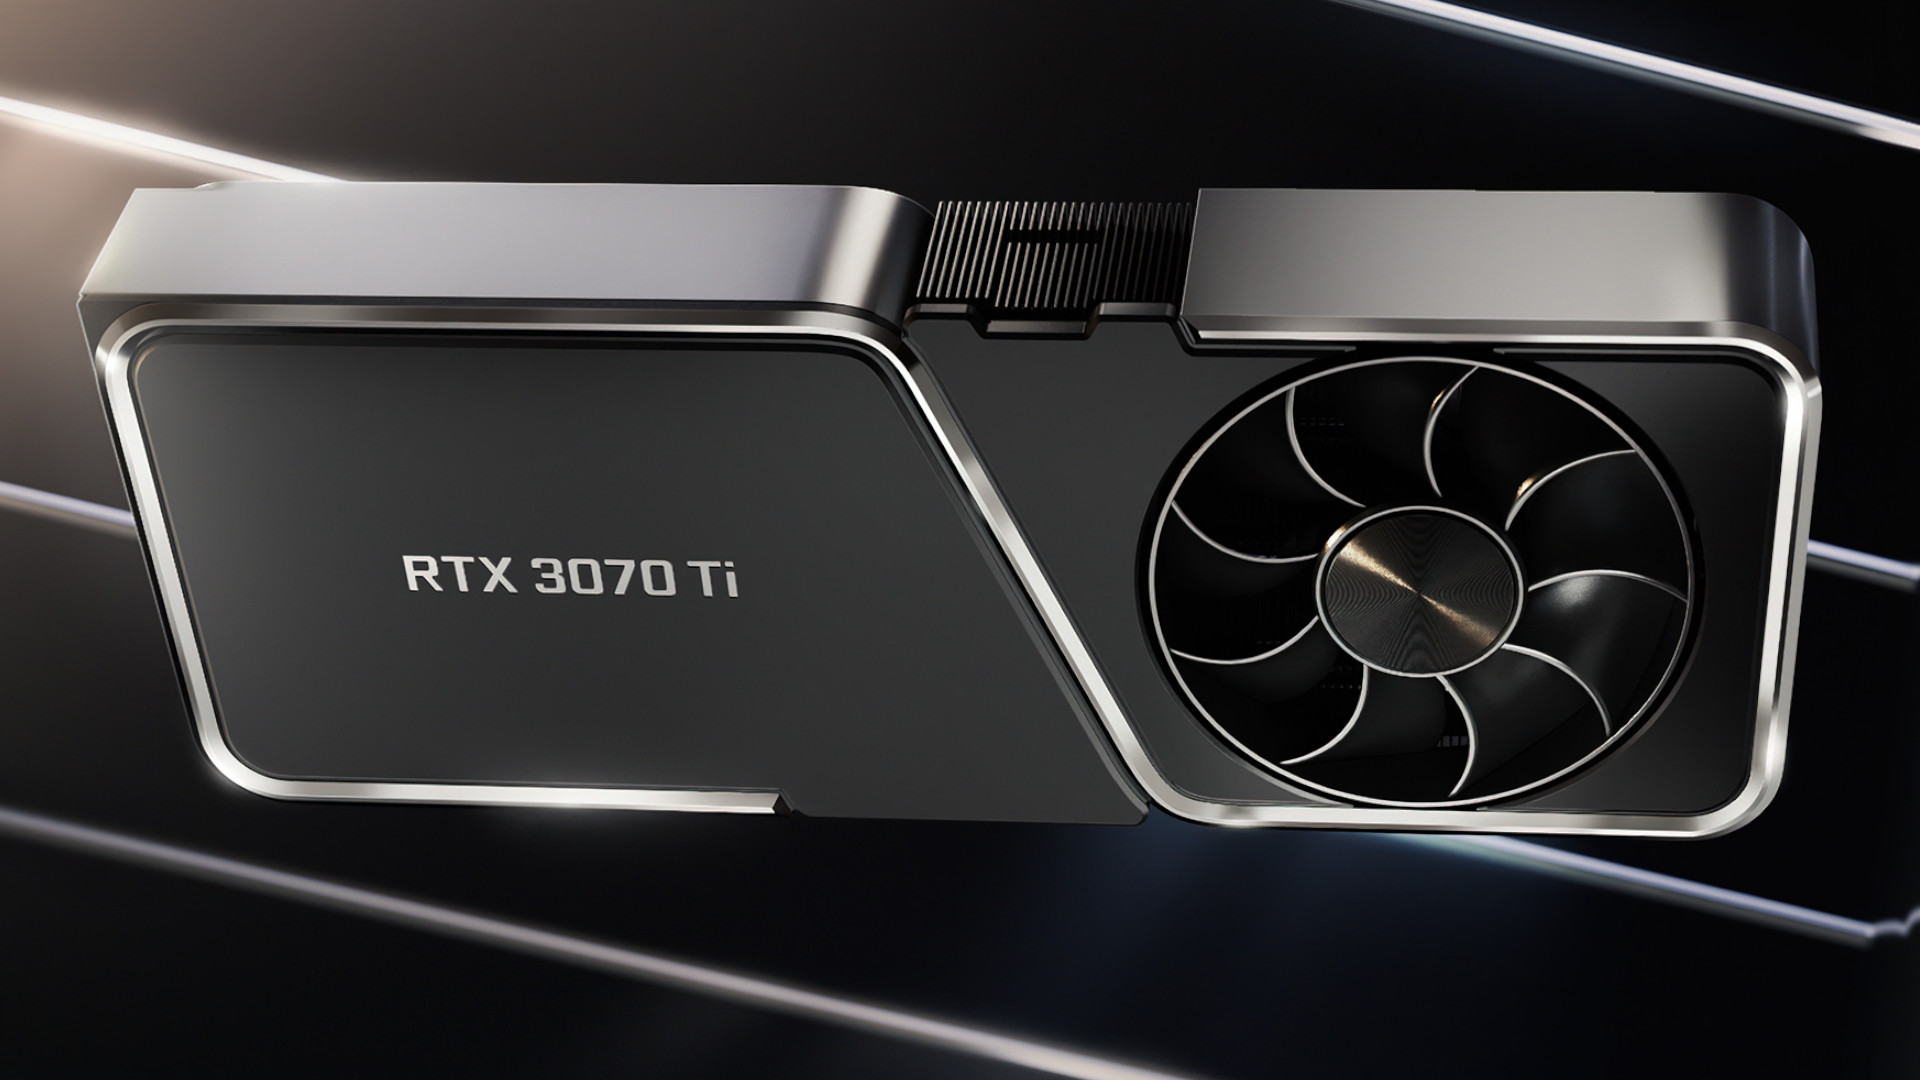 Nvidia reportedly delays its GeForce RTX 3070 Ti 16GB and RTX 3080 12GB GPUs